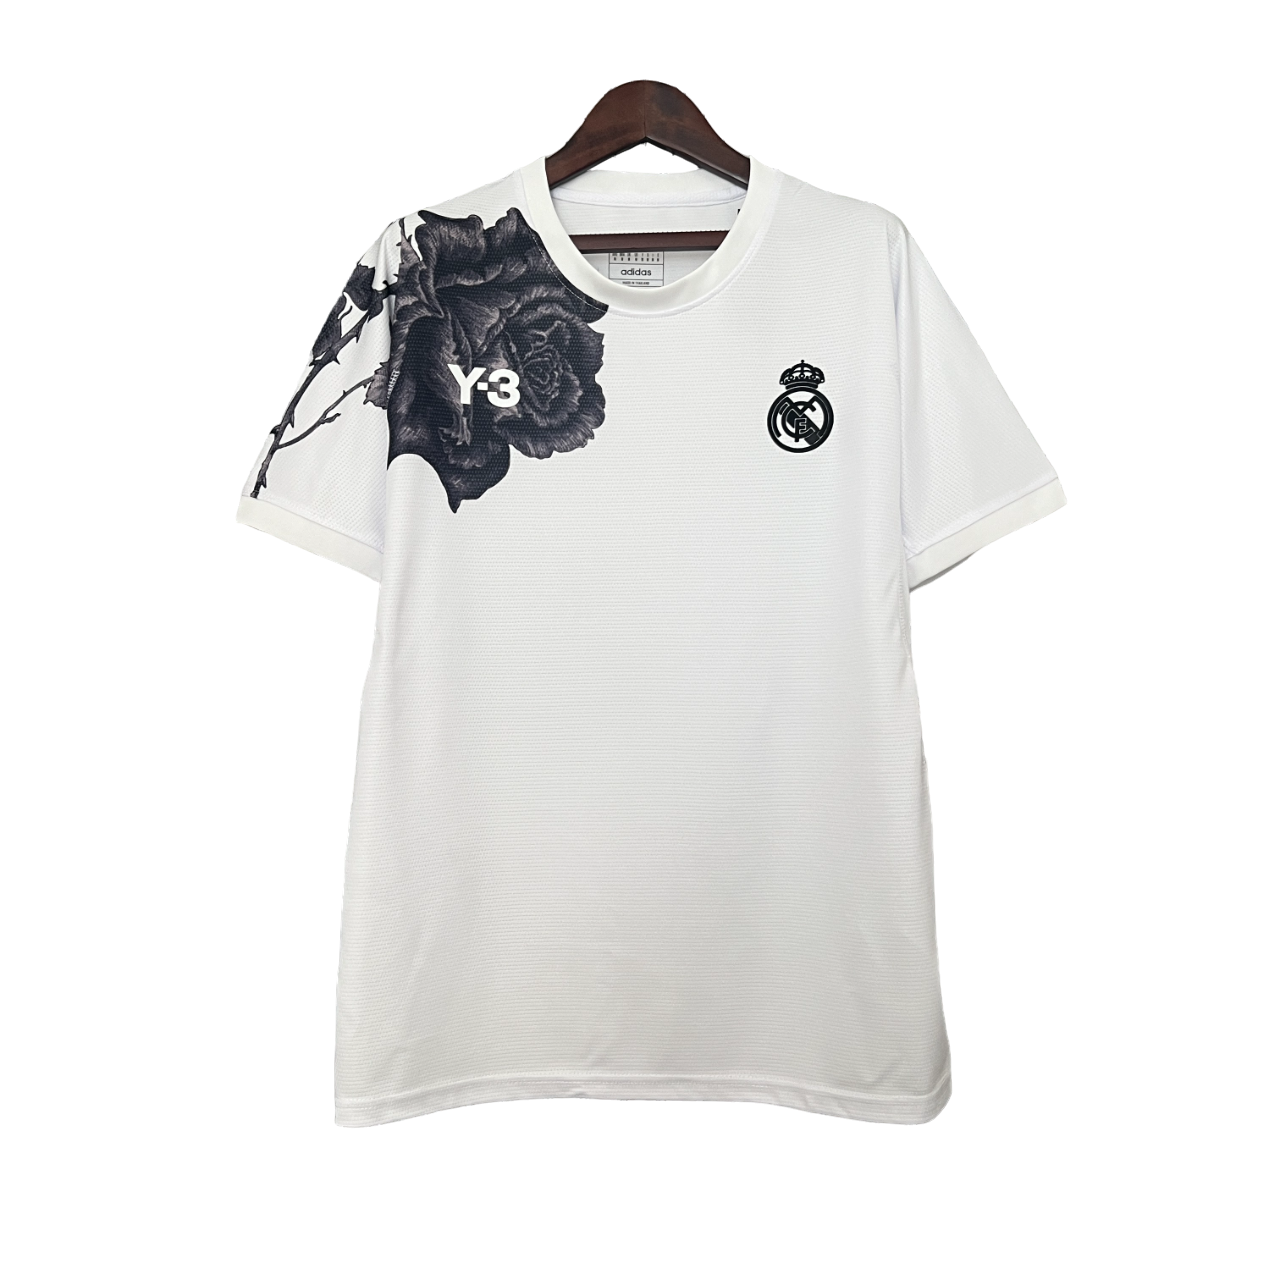 Real Madrid - Special Edition 24/25